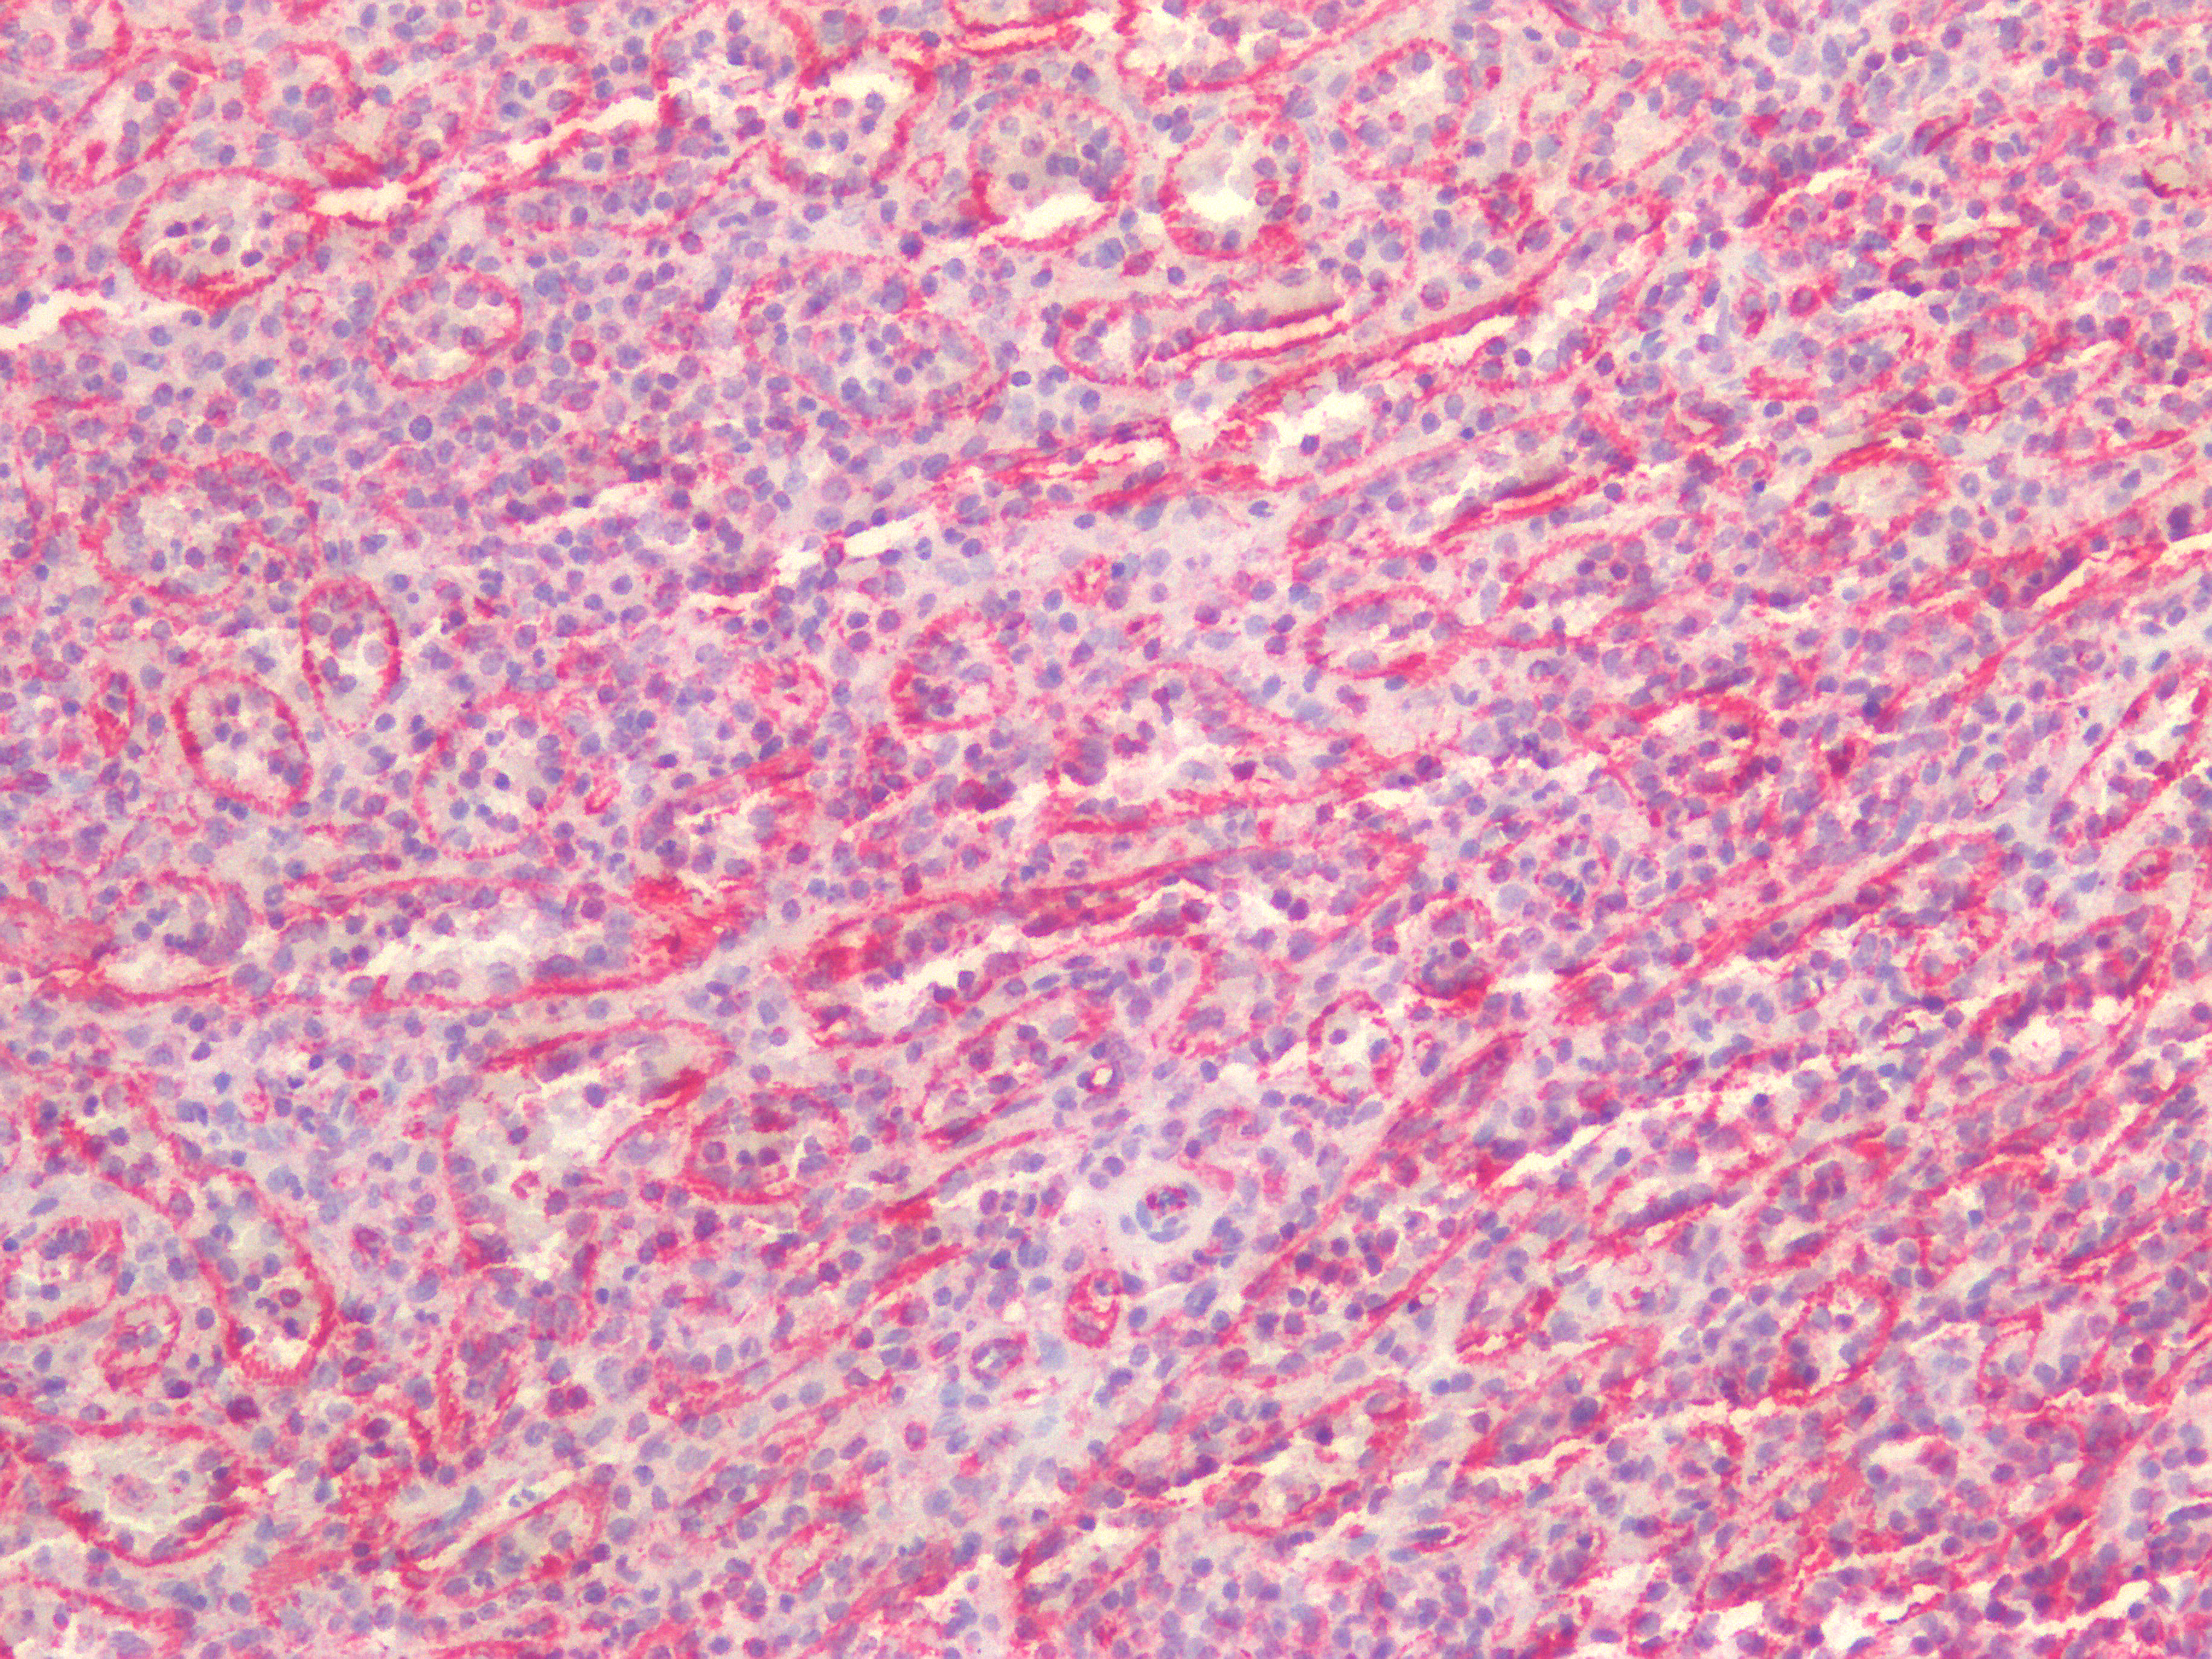 Figure 9. Immunostaining of human paraffin embedded tissue sections of human spleen with MUB1904P (diluted 1:200), showing the specific pattern of vimentin in the mesenchymal cell types.